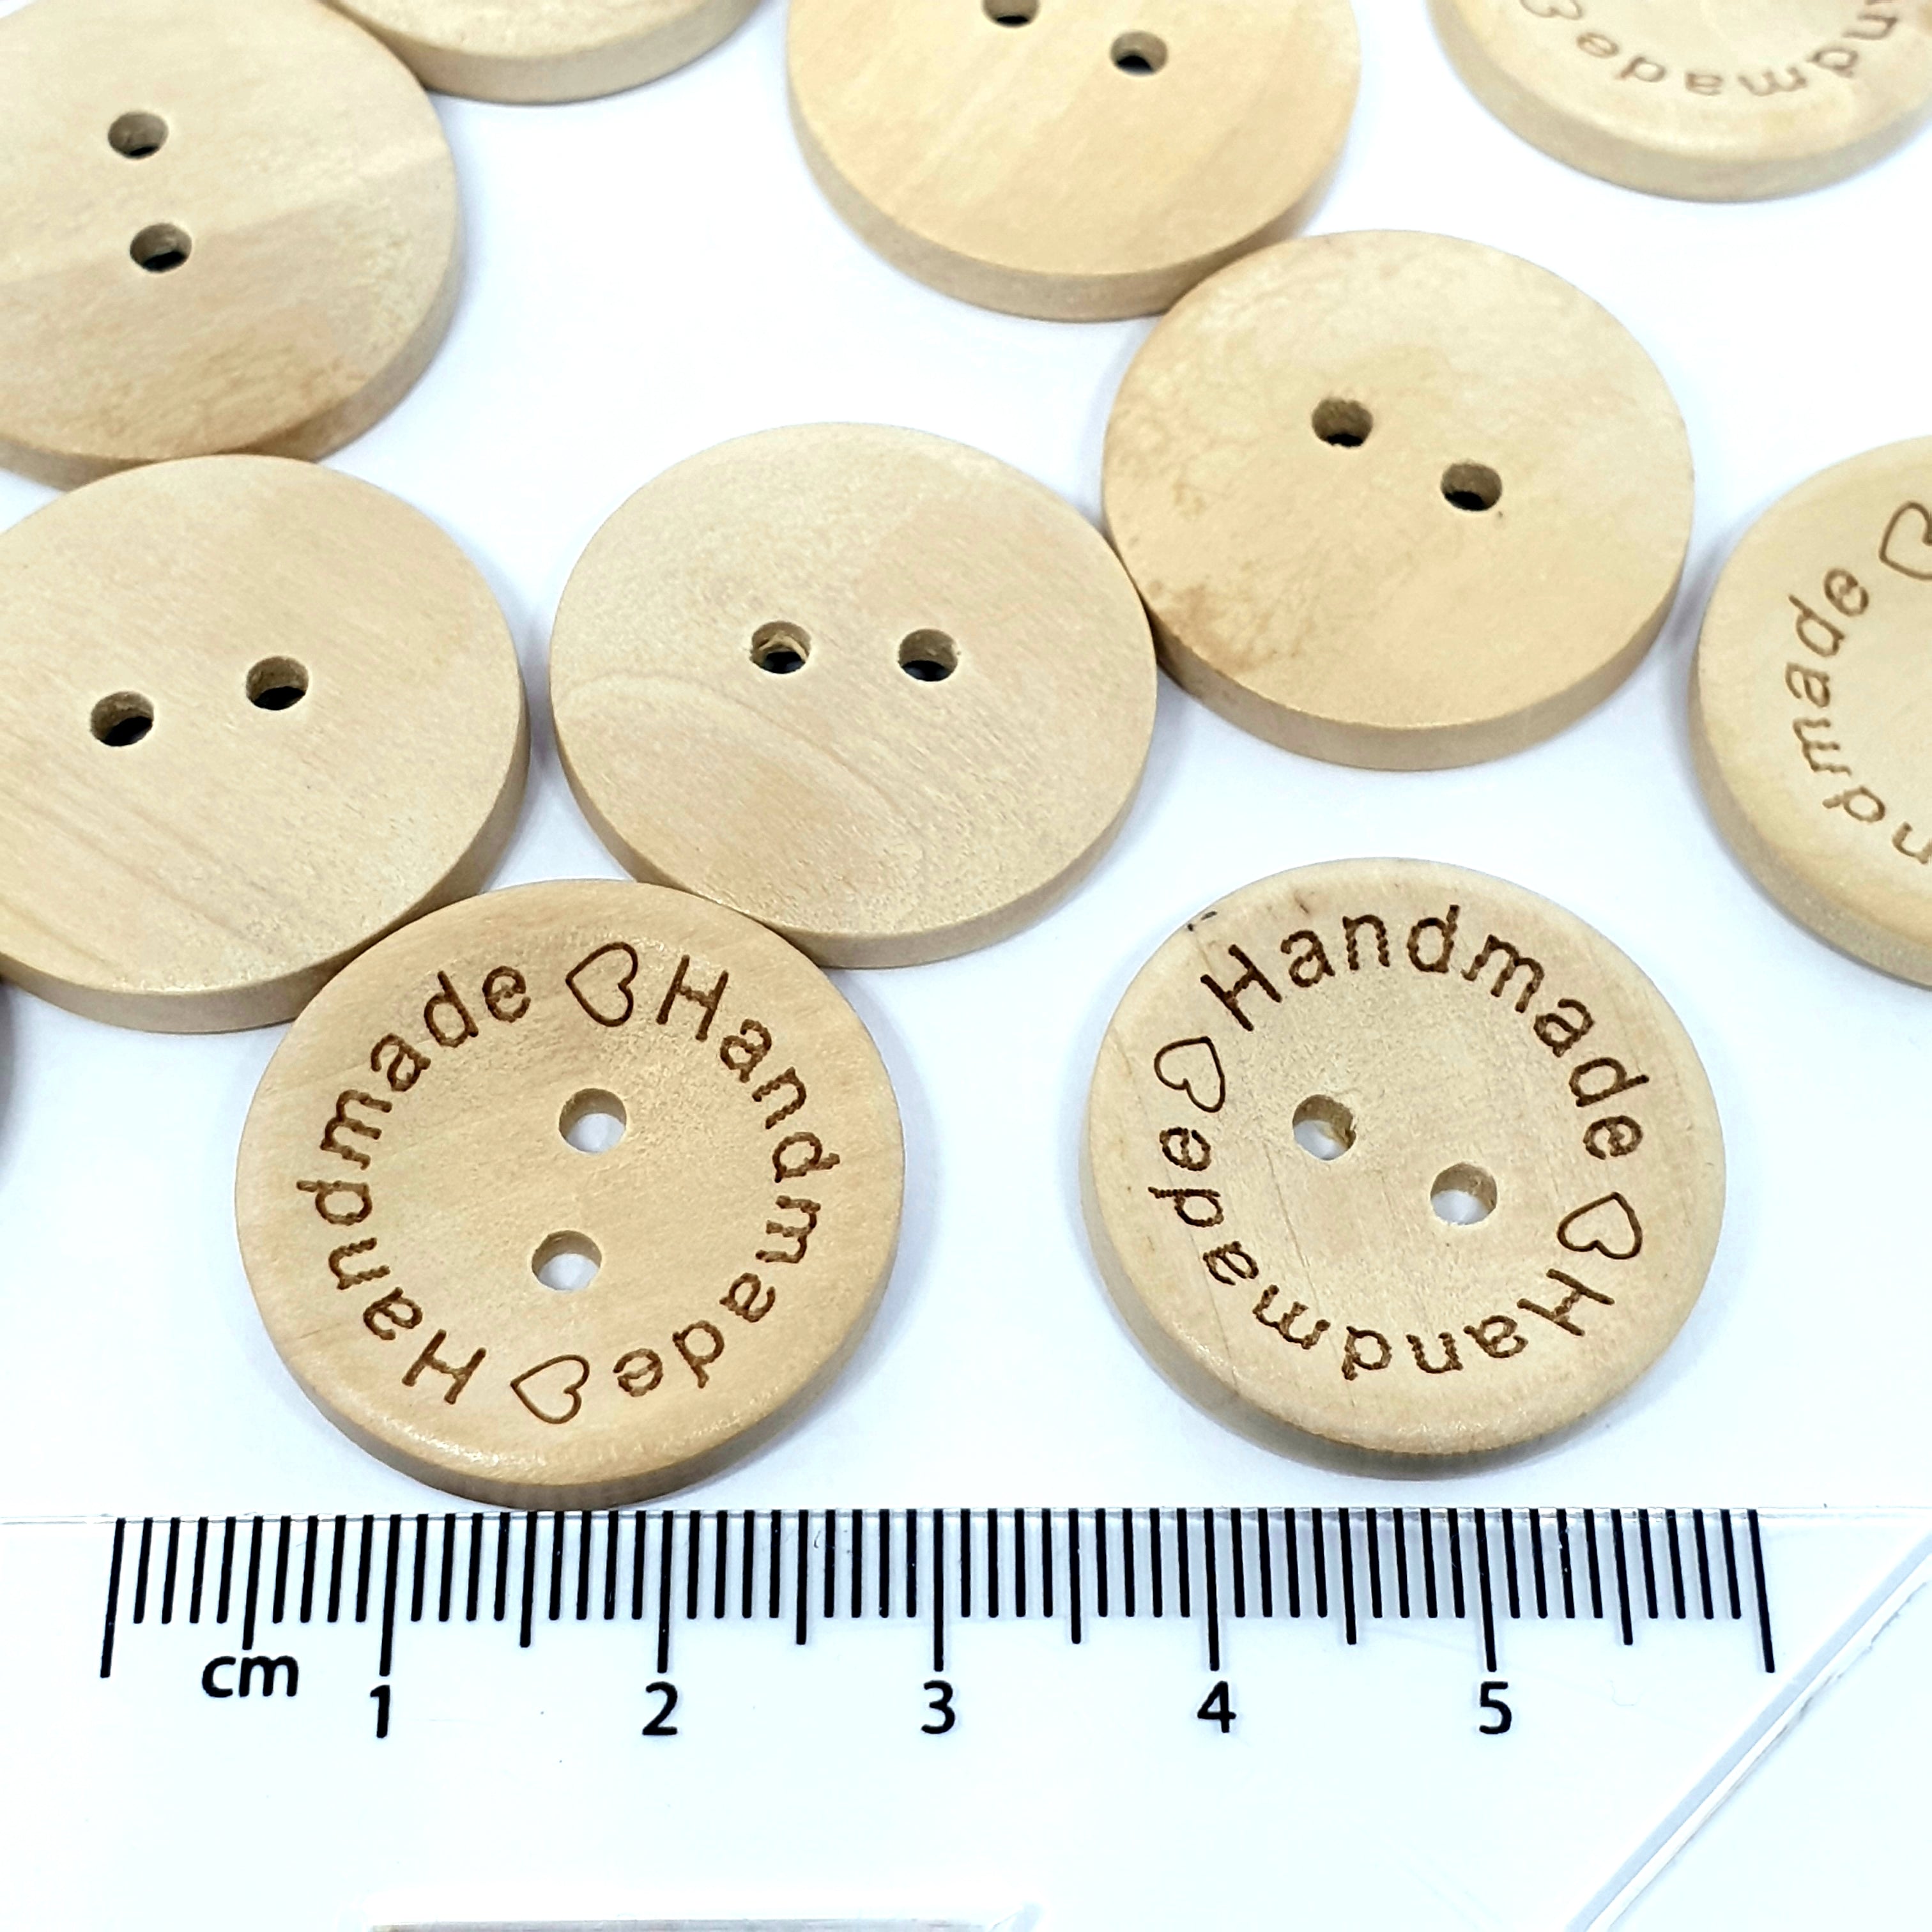 MajorCrafts 24pcs 25mm Brown 'Handmade' Engraved 2 Holes Wooden Sewing Buttons